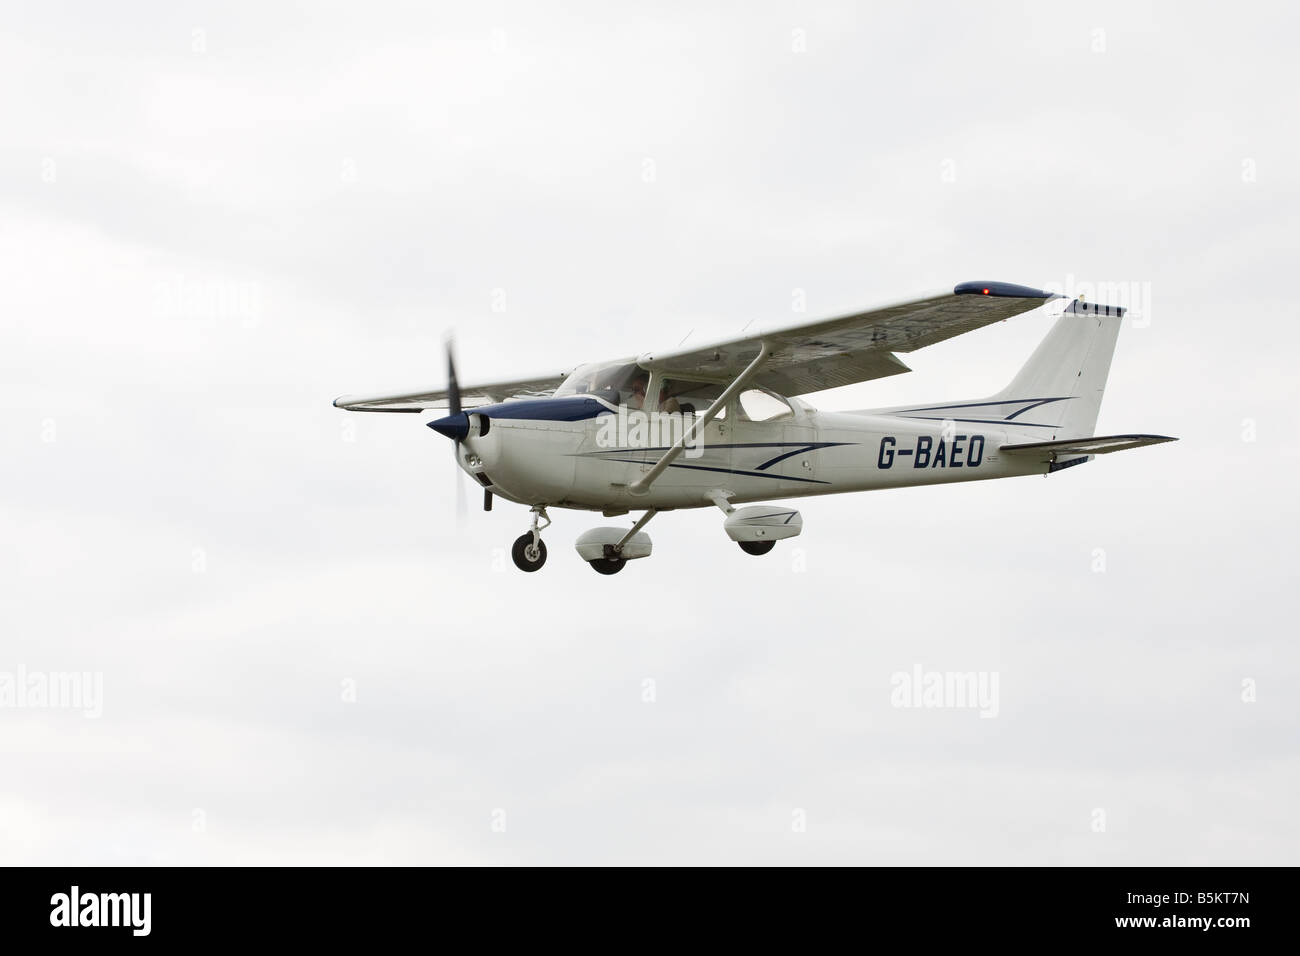 Reims Cessna 1172N G-BAEO on final approach to land at Sandtoft Airfield Stock Photo